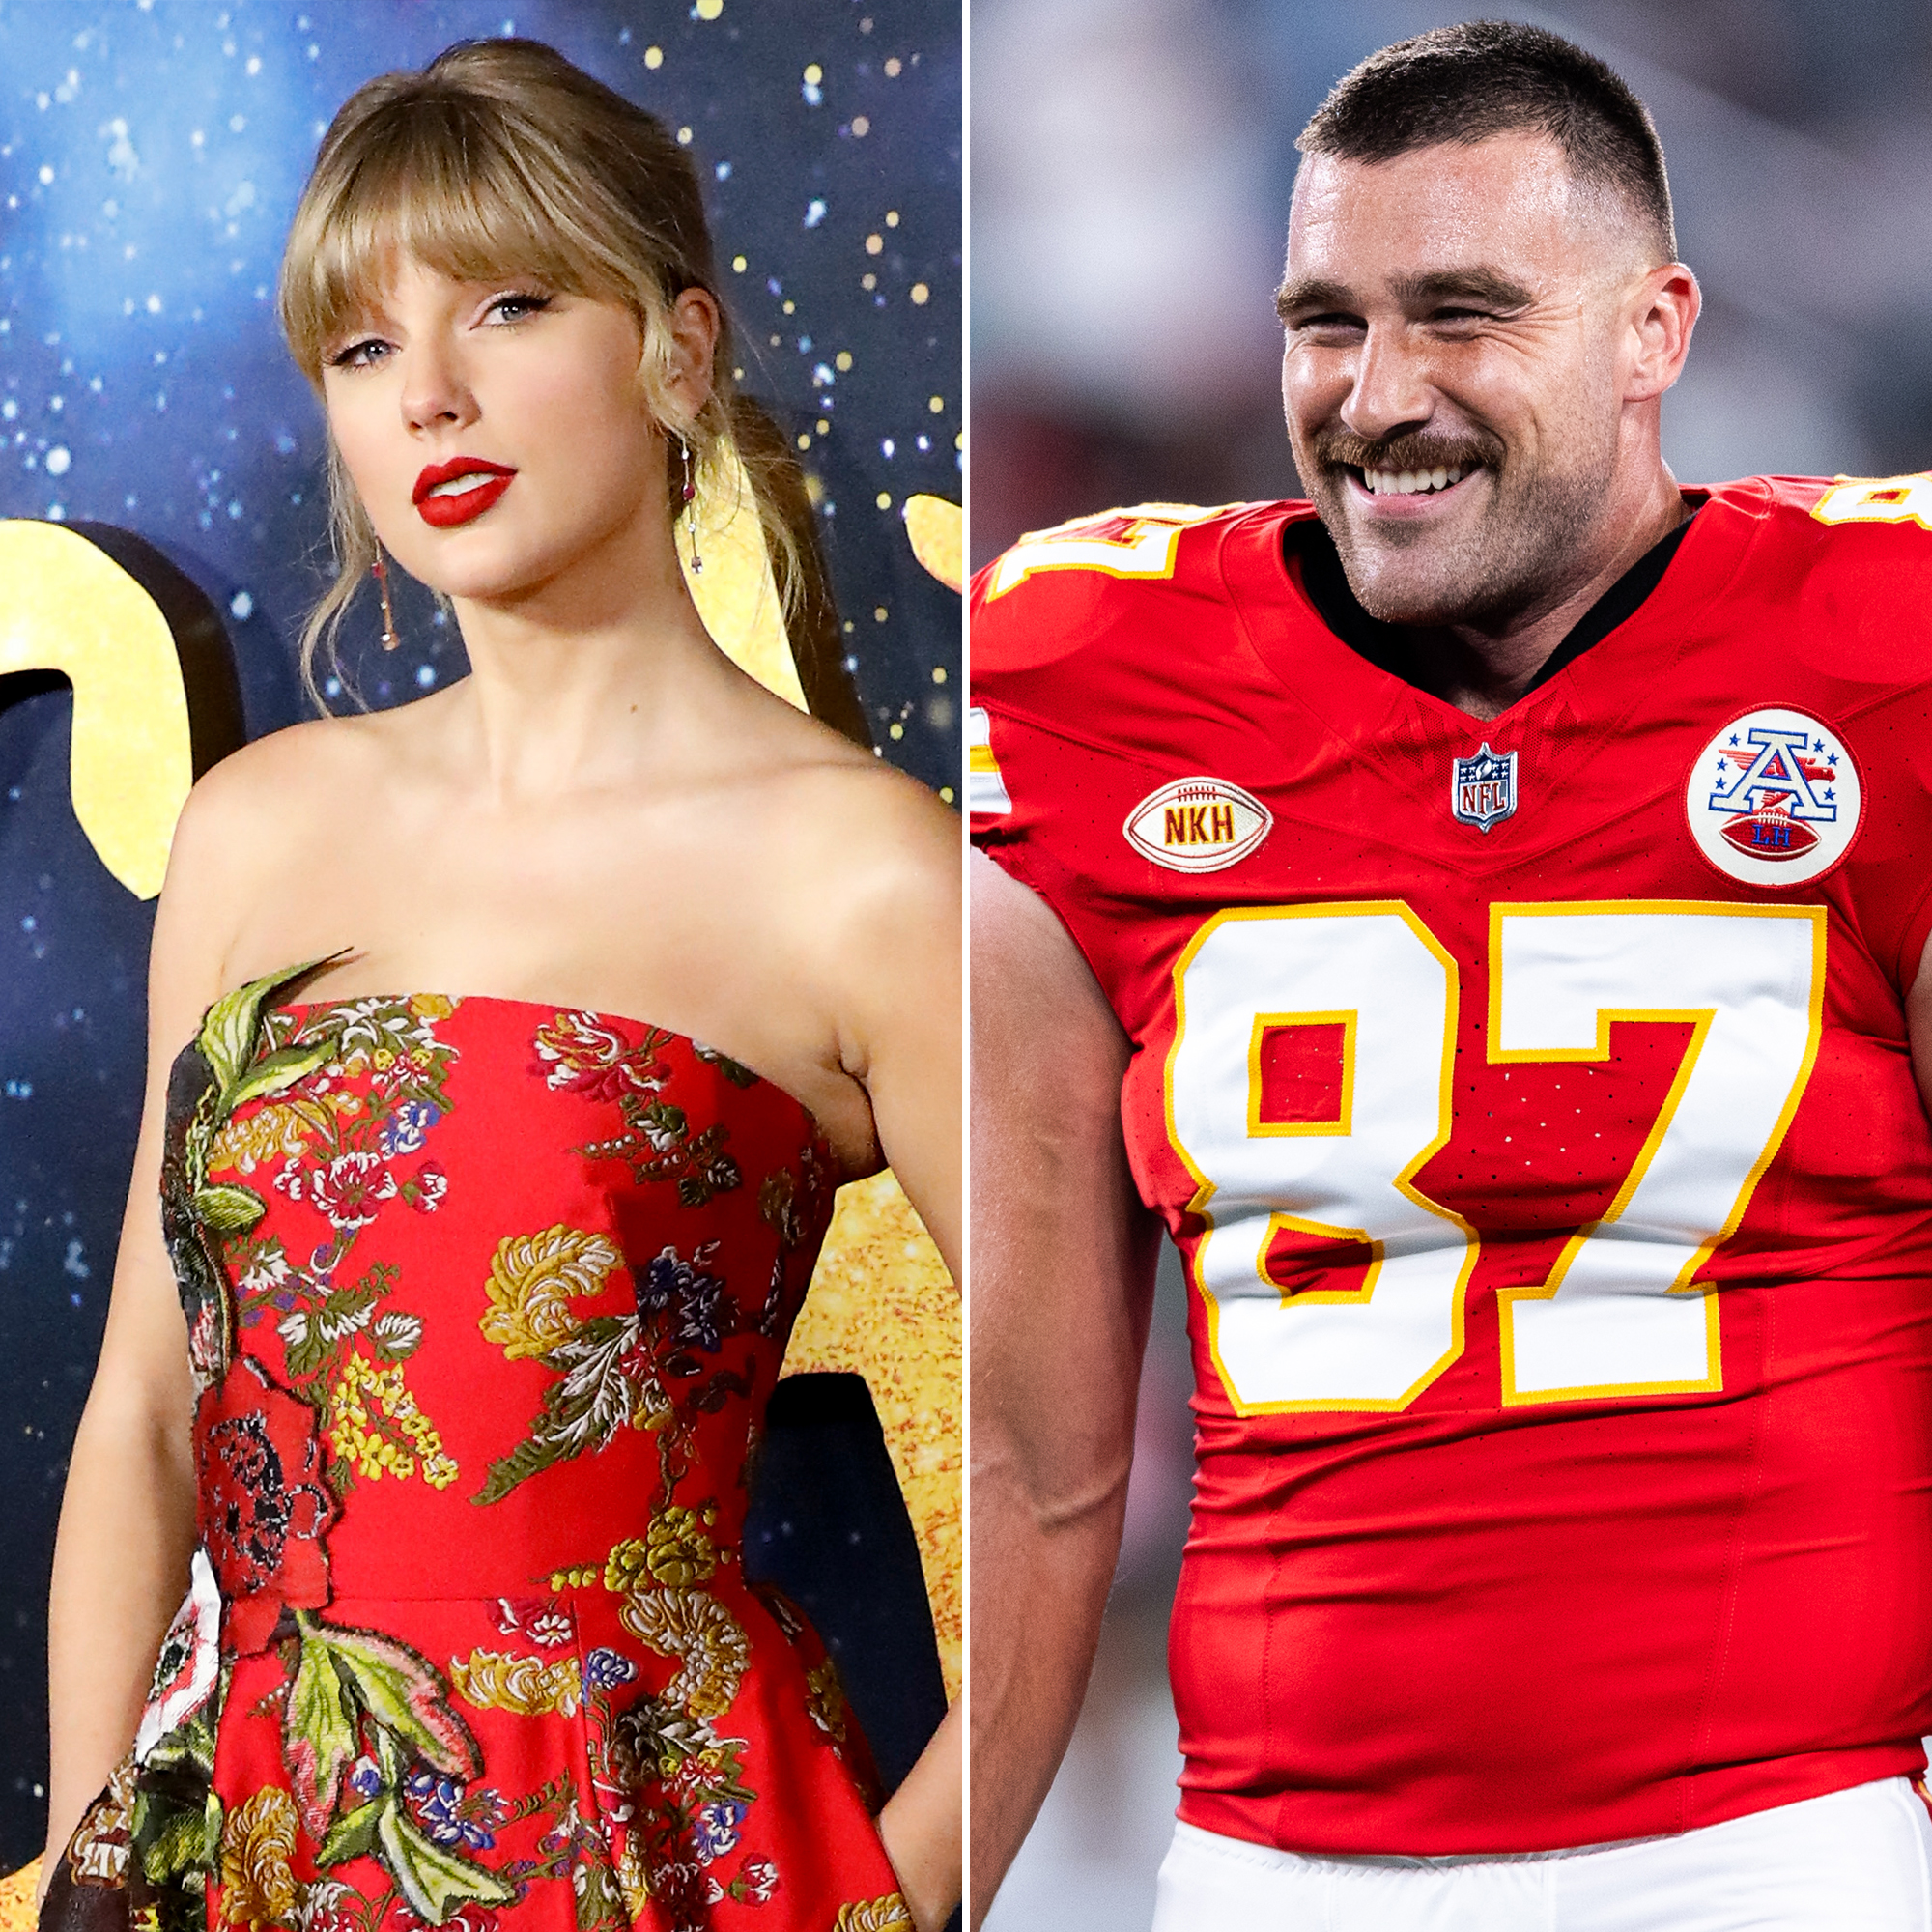 Taylor Swift Blocks NFL From Playing Her Music at Chiefs Game